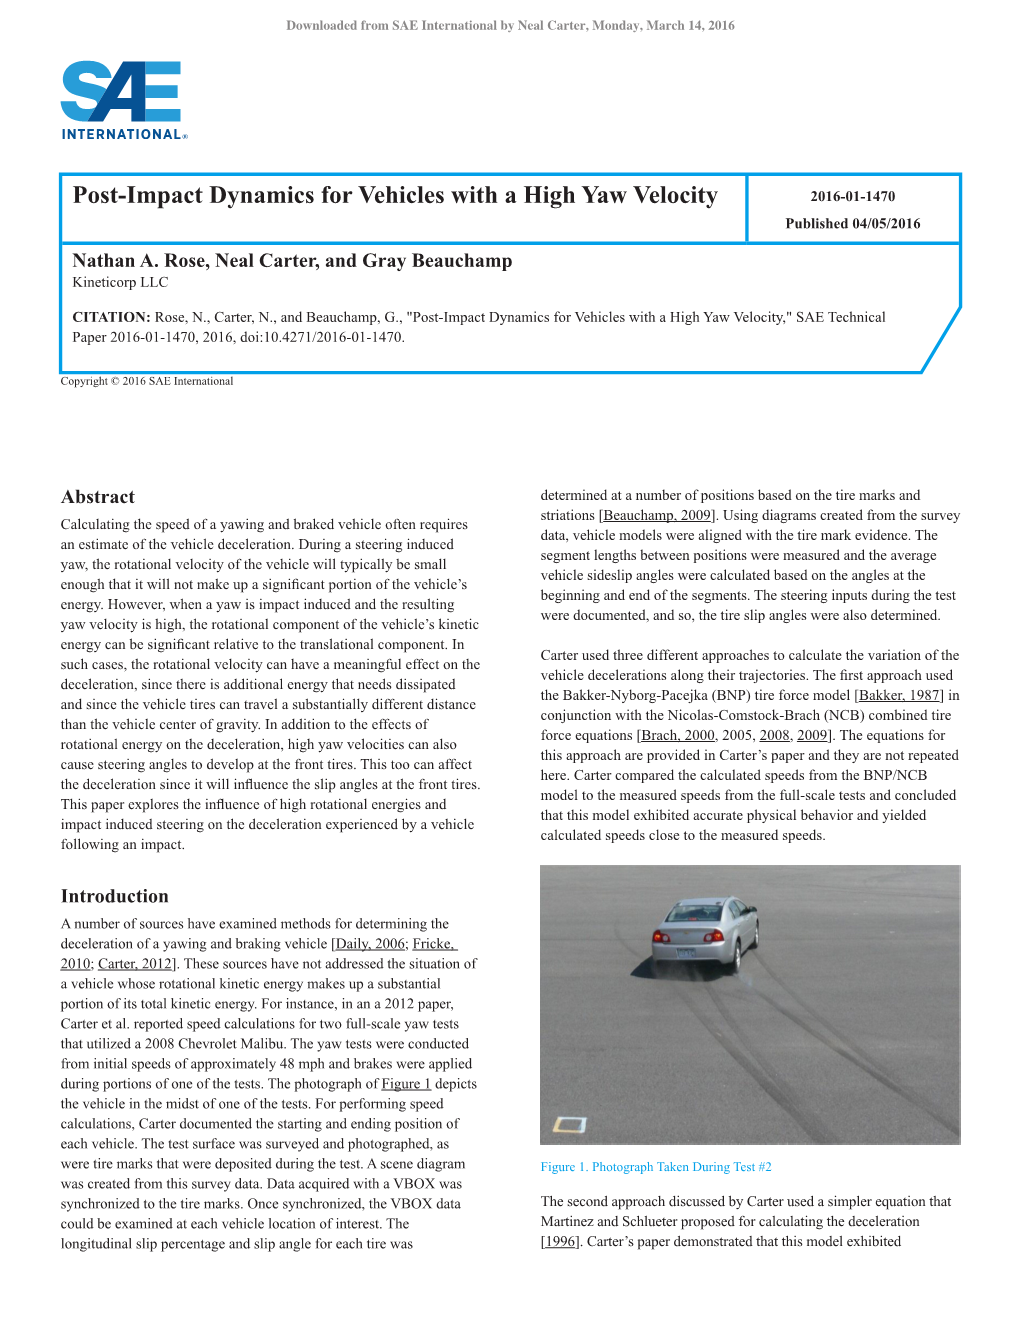 Post-Impact Dynamics for Vehicles with a High Yaw Velocity 2016-01-1470 Published 04/05/2016